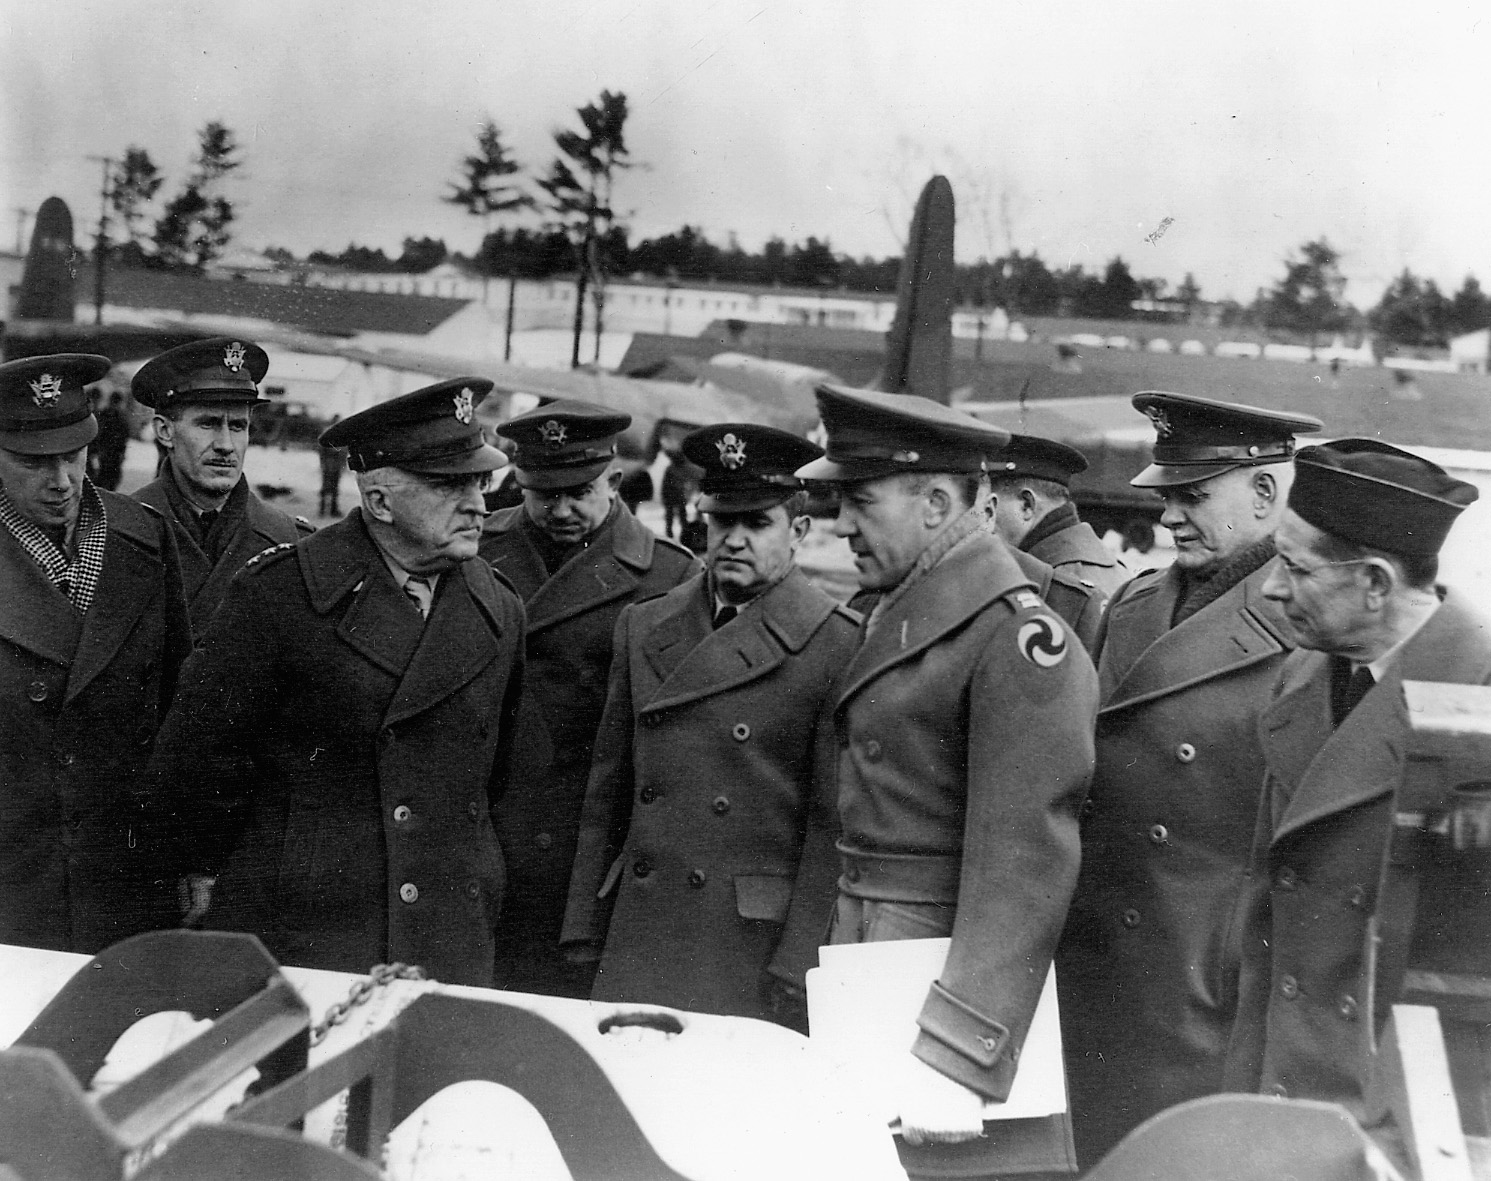 Lt. Gen. Hugh Drum is seen meeting with other senior military personnel at Grenier Field, New Hampshire.